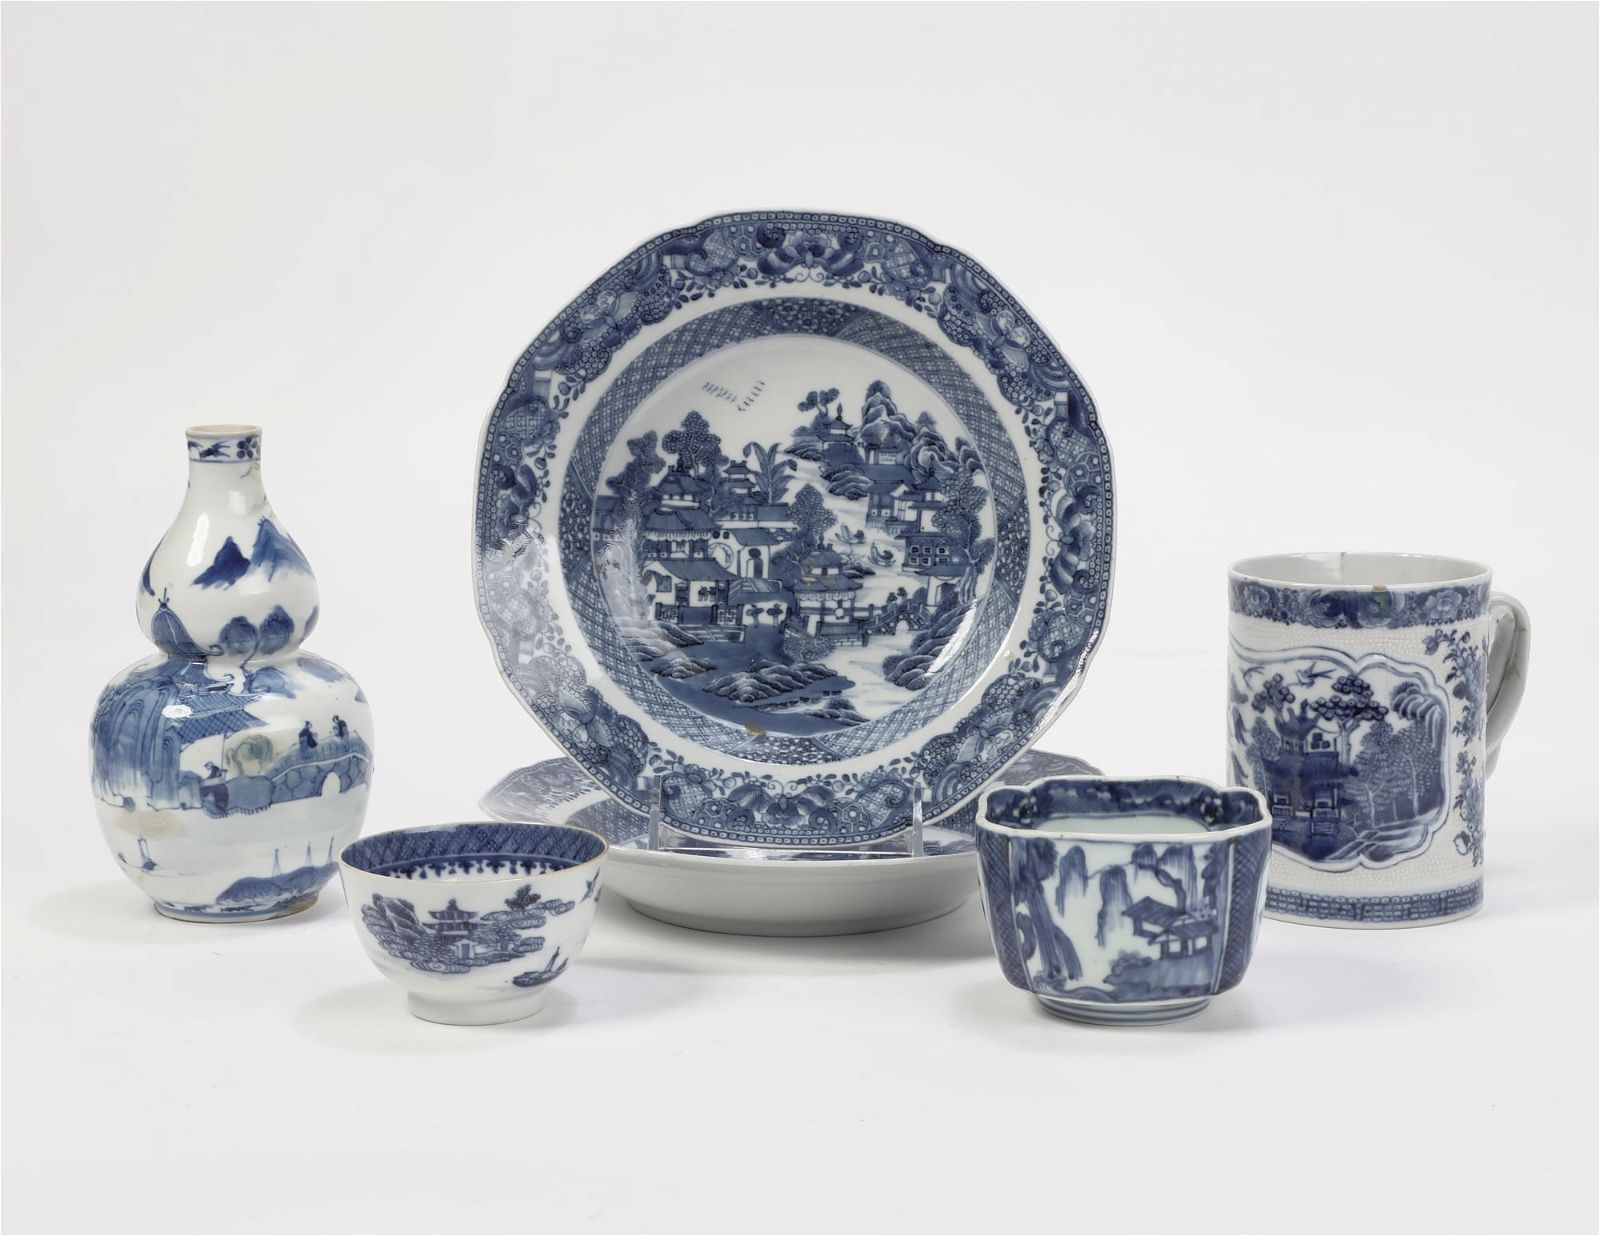 SIX CHINESE EXPORT PORCELAIN ARTICLESSix